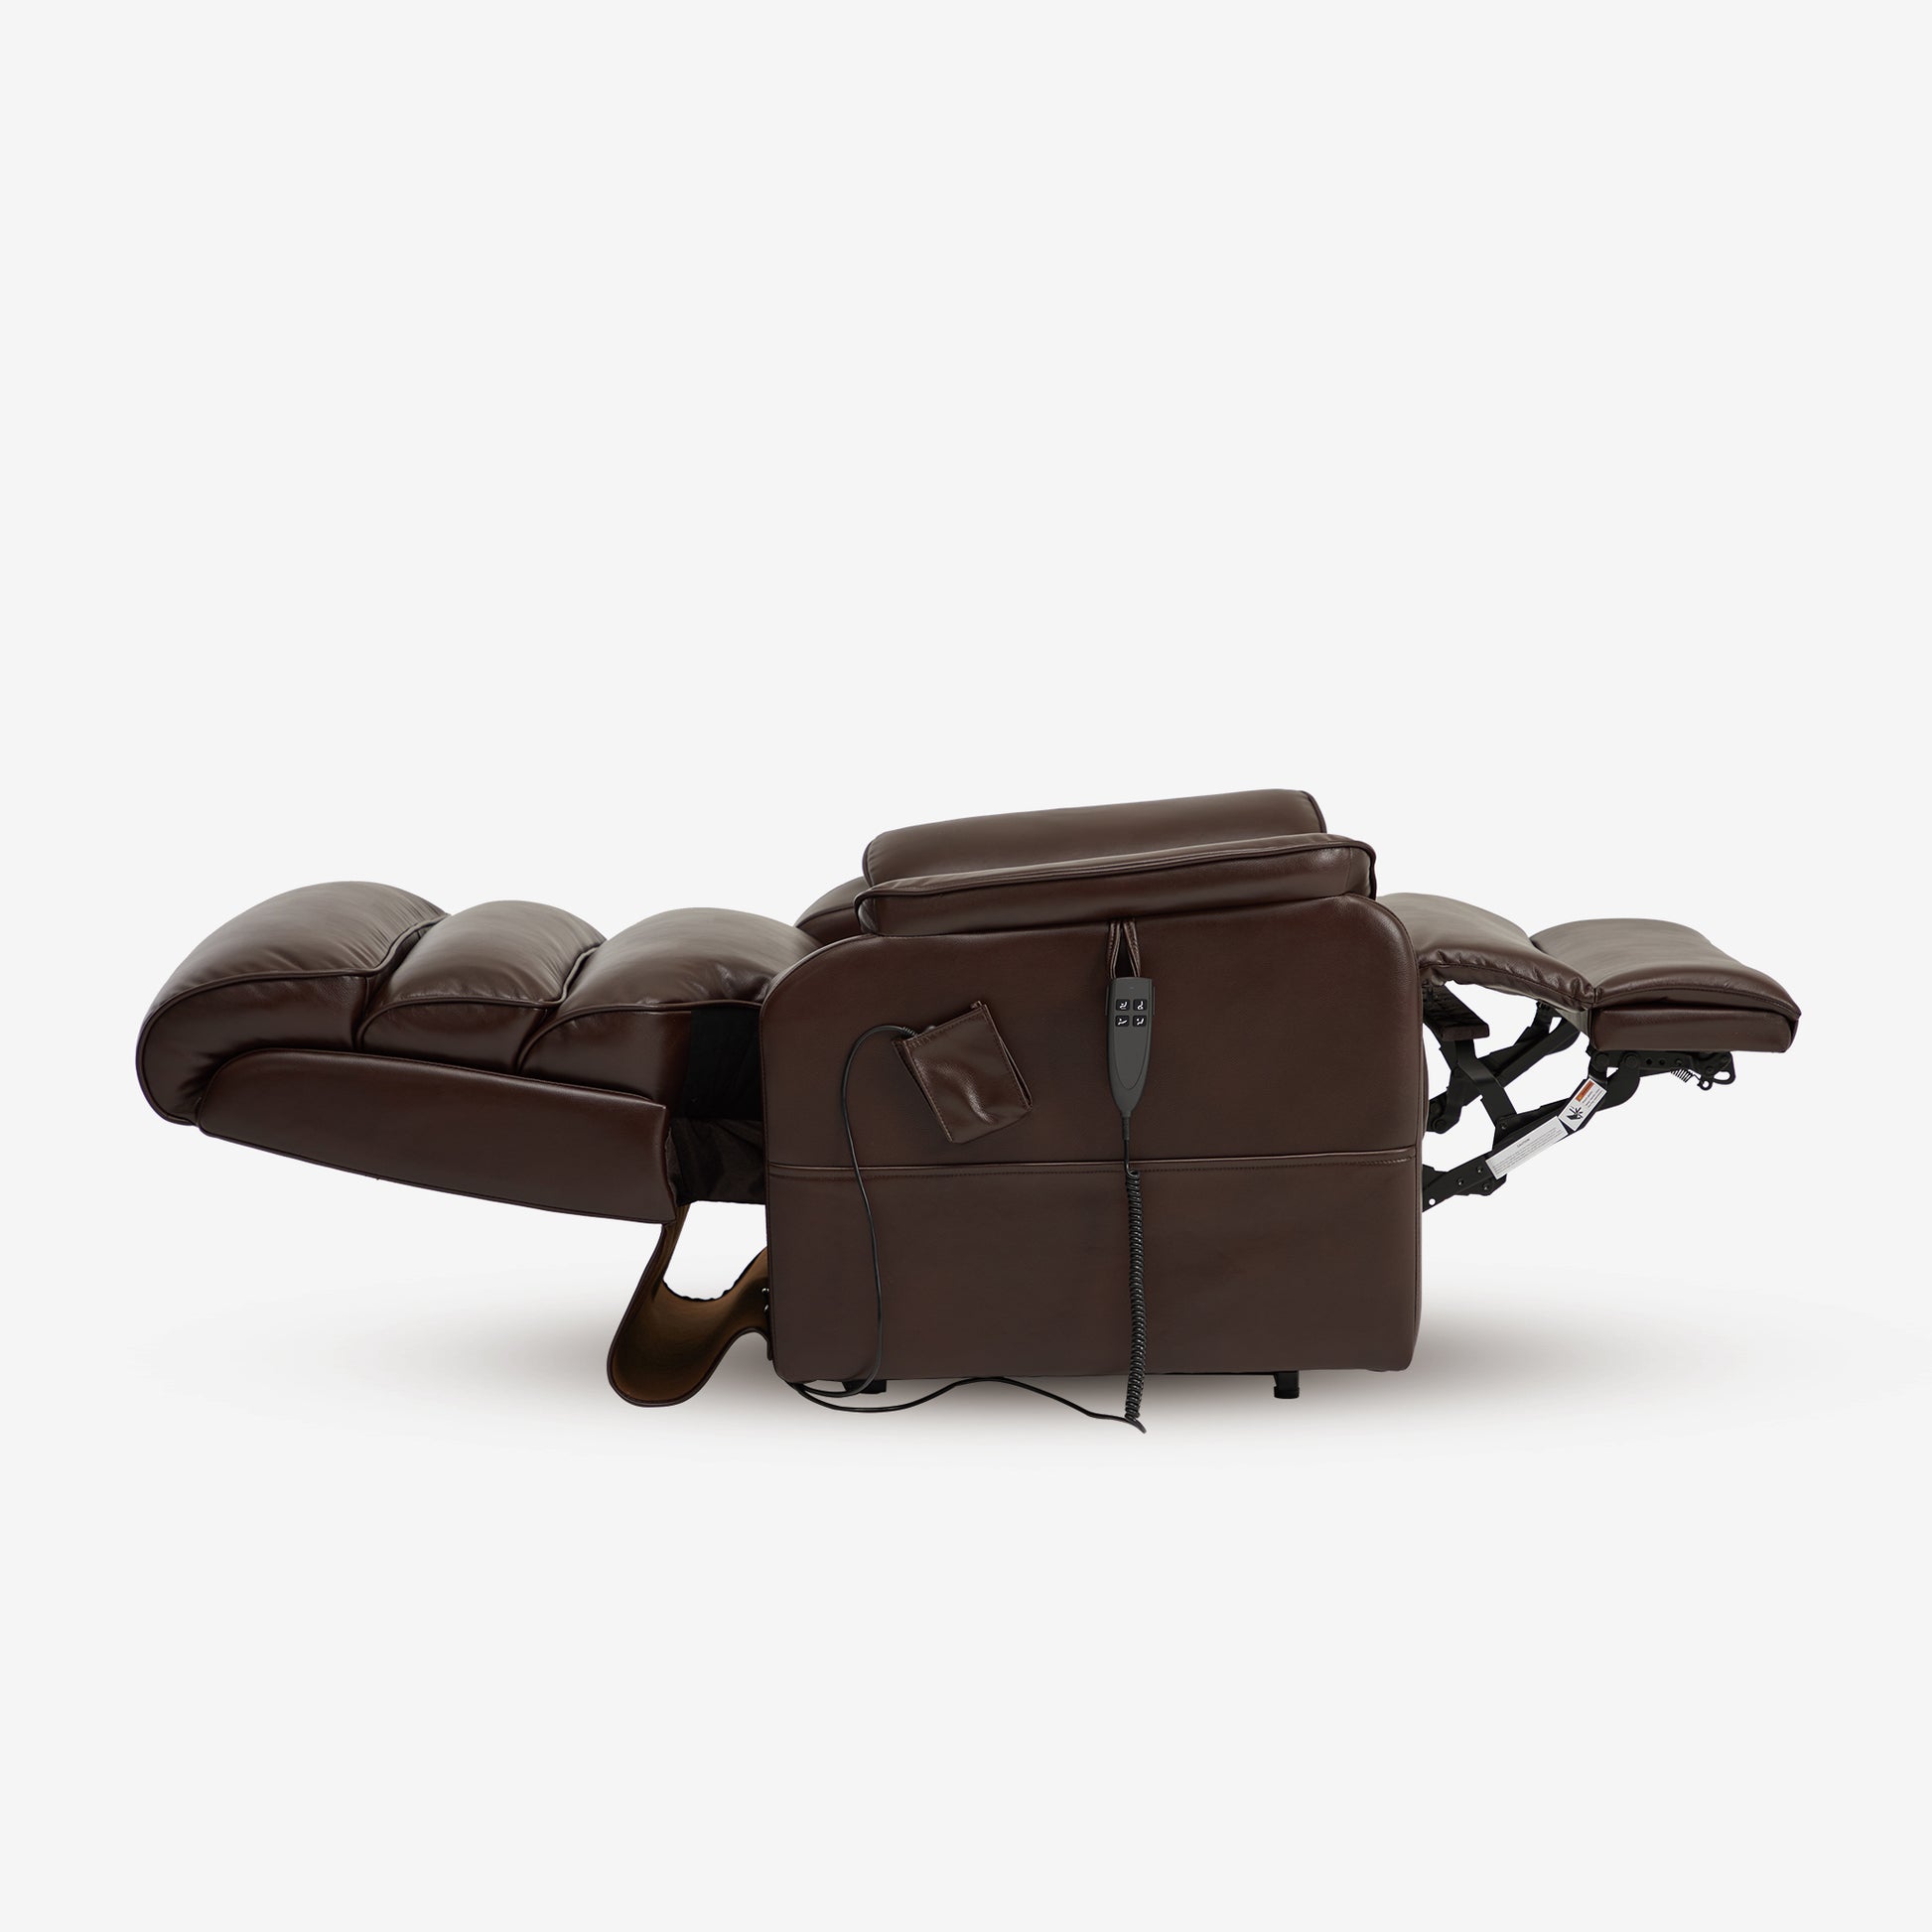 Oversized Lay Flat Recliner With Heat&massage And Infinite Positons